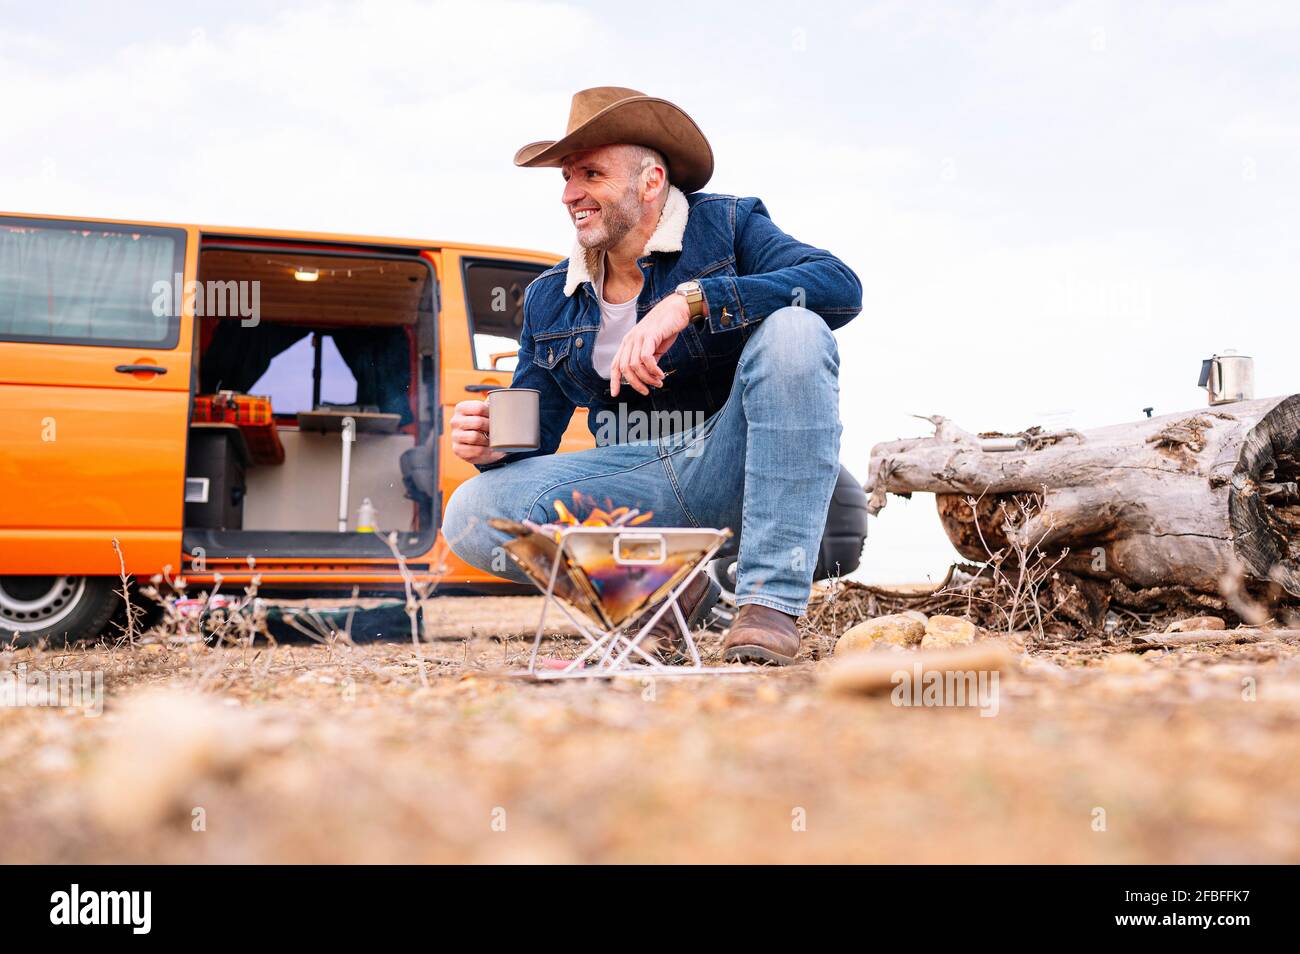 https://c8.alamy.com/comp/2FBFFK7/smiling-mature-man-in-hat-crouching-while-having-coffee-by-wood-burning-stove-during-camp-2FBFFK7.jpg